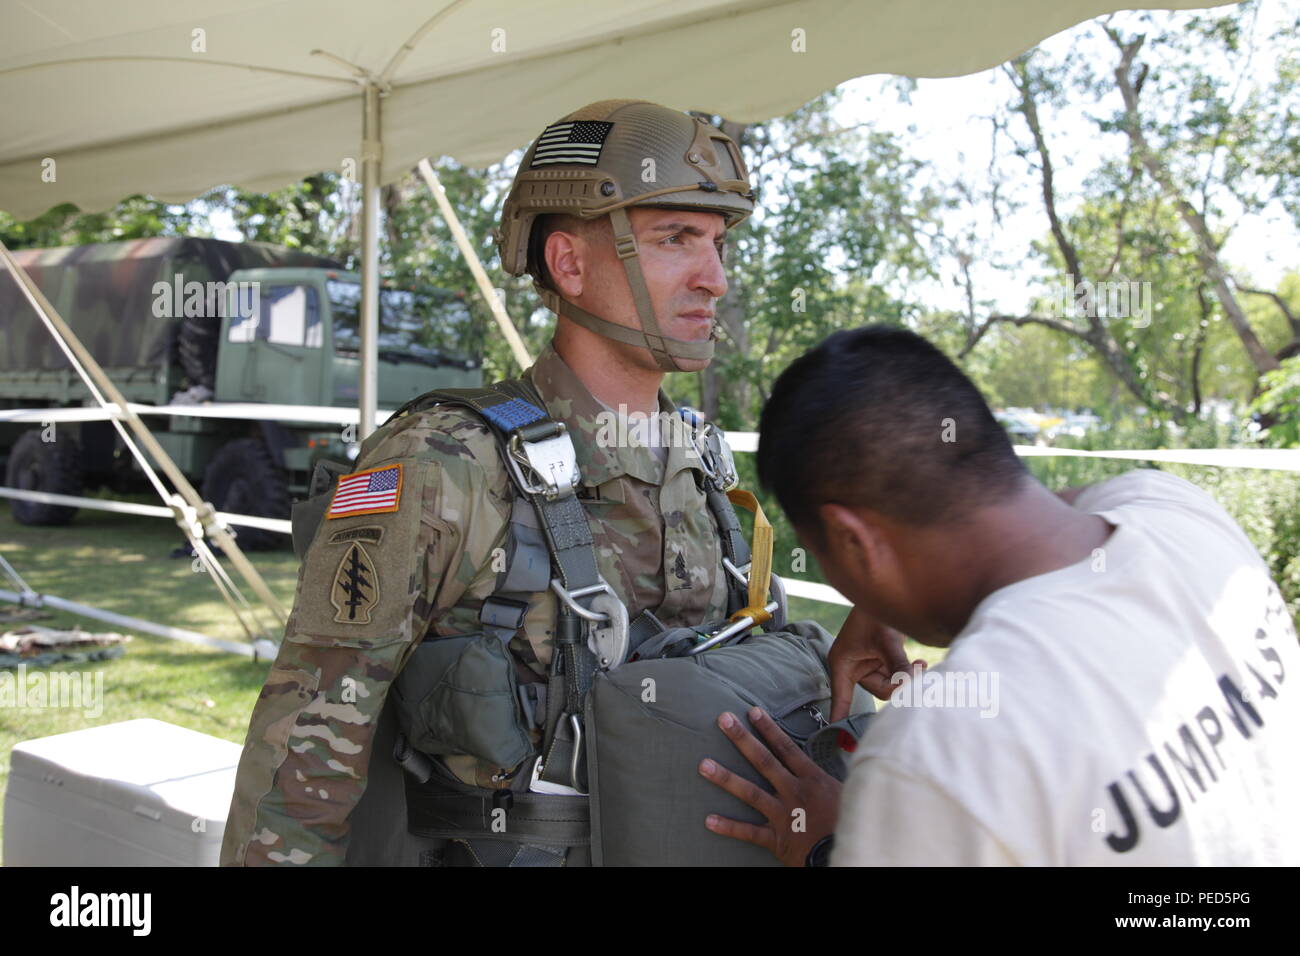 U.S. Army Staff Sgt. Justin Morelli, 982nd Combat Camera Co., waits as a rigger checks his parachute at Leapfest in West Kingston, R.I., Aug. 1, 2015. Leapfest is an International parachute competition hosted by the 56th Troop Command, Rhode Island National Guard to promote high level technical training and esprit de corps within the International Airborne community. (U.S. Army Photo by Spc. Josephine Carlson/Released) Stock Photo